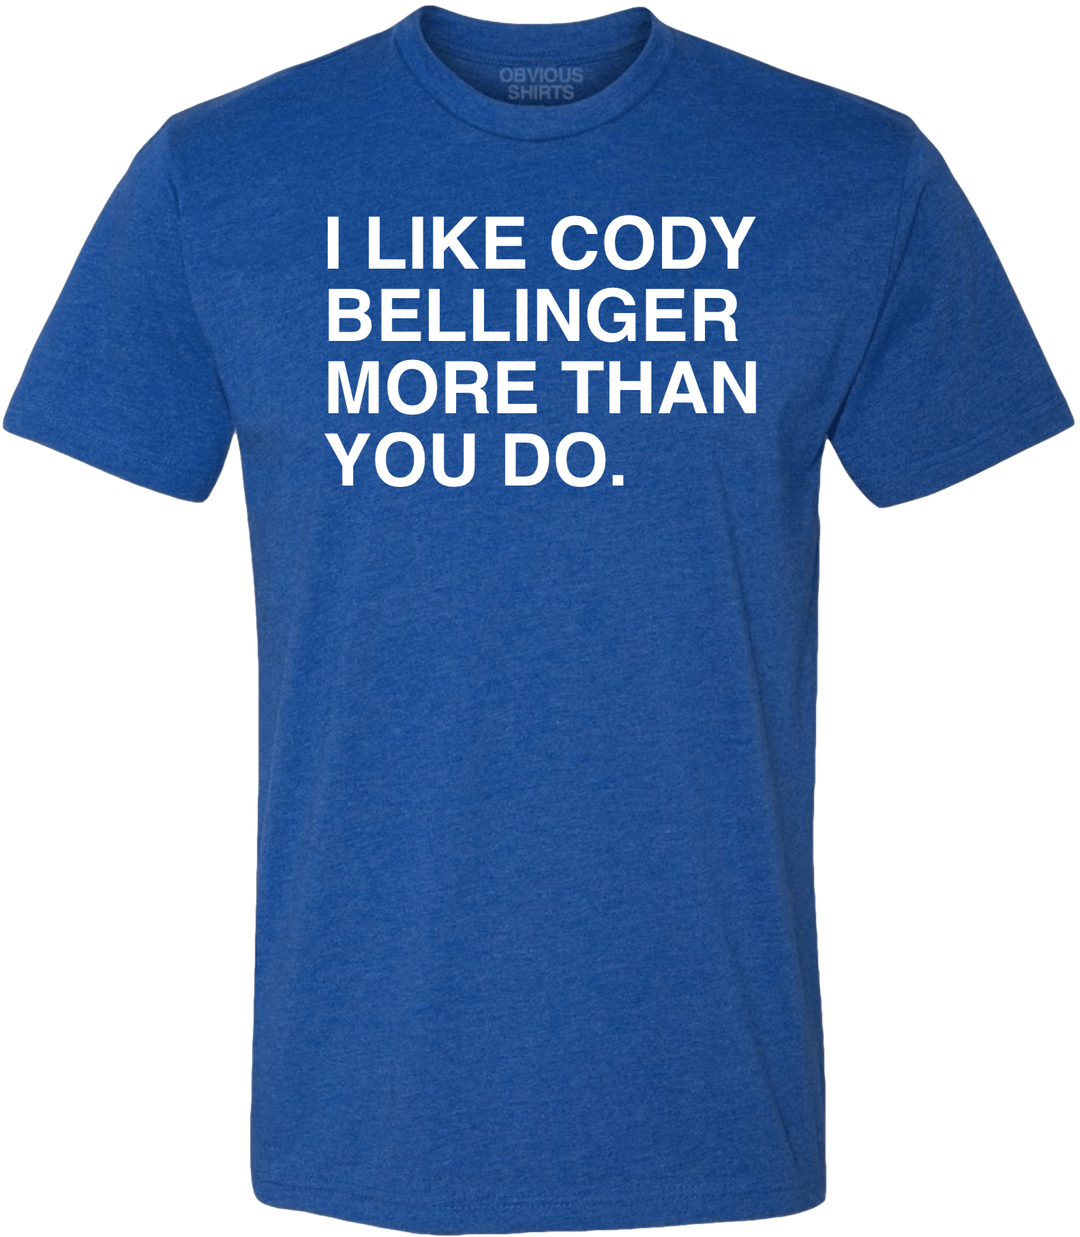 I LIKE CODY BELLINGER MORE THAN YOU DO. - OBVIOUS SHIRTS